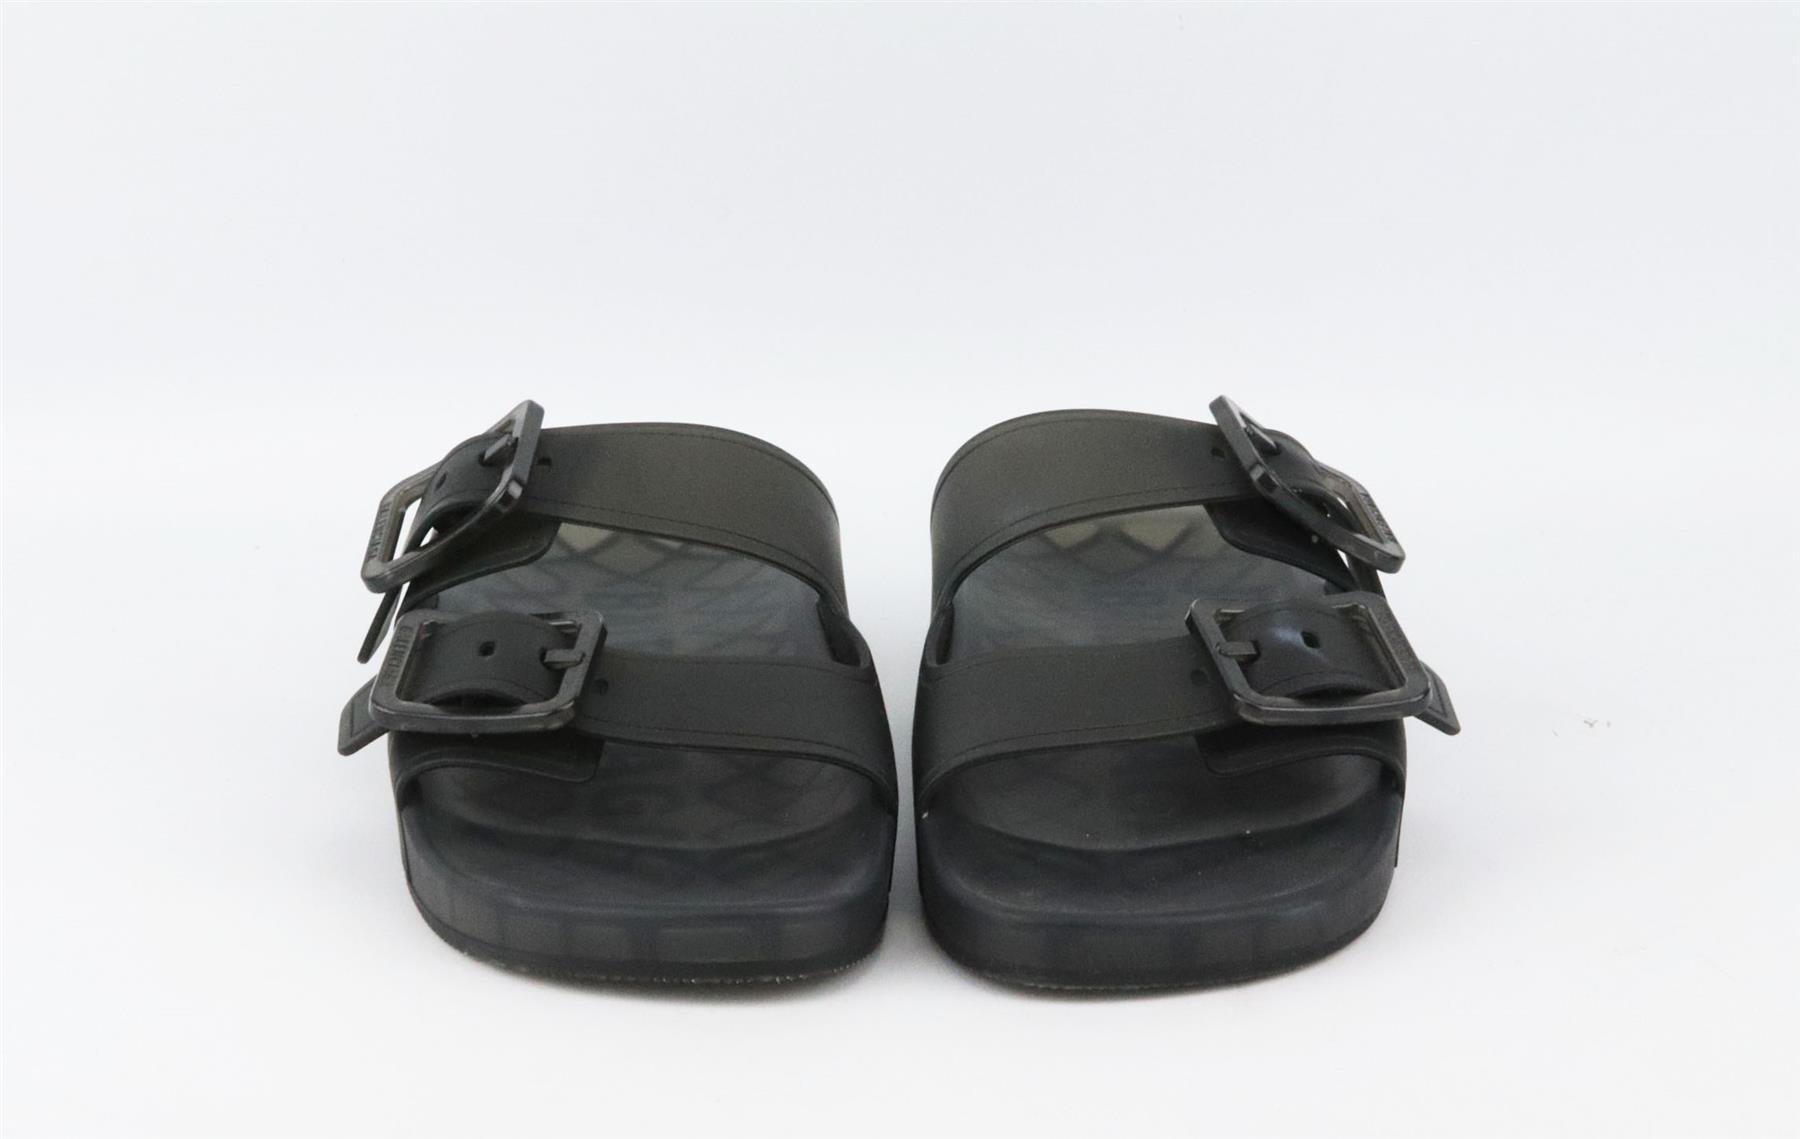 The Balenciaga slides are topped with buckles, they've been made in Italy from black rubber and have comfortable molded footbeds and thick soles. Sole measures approximately 15mm/ 0.5 inches. Black rubber. Slip on. Does not come with box or dustbag.